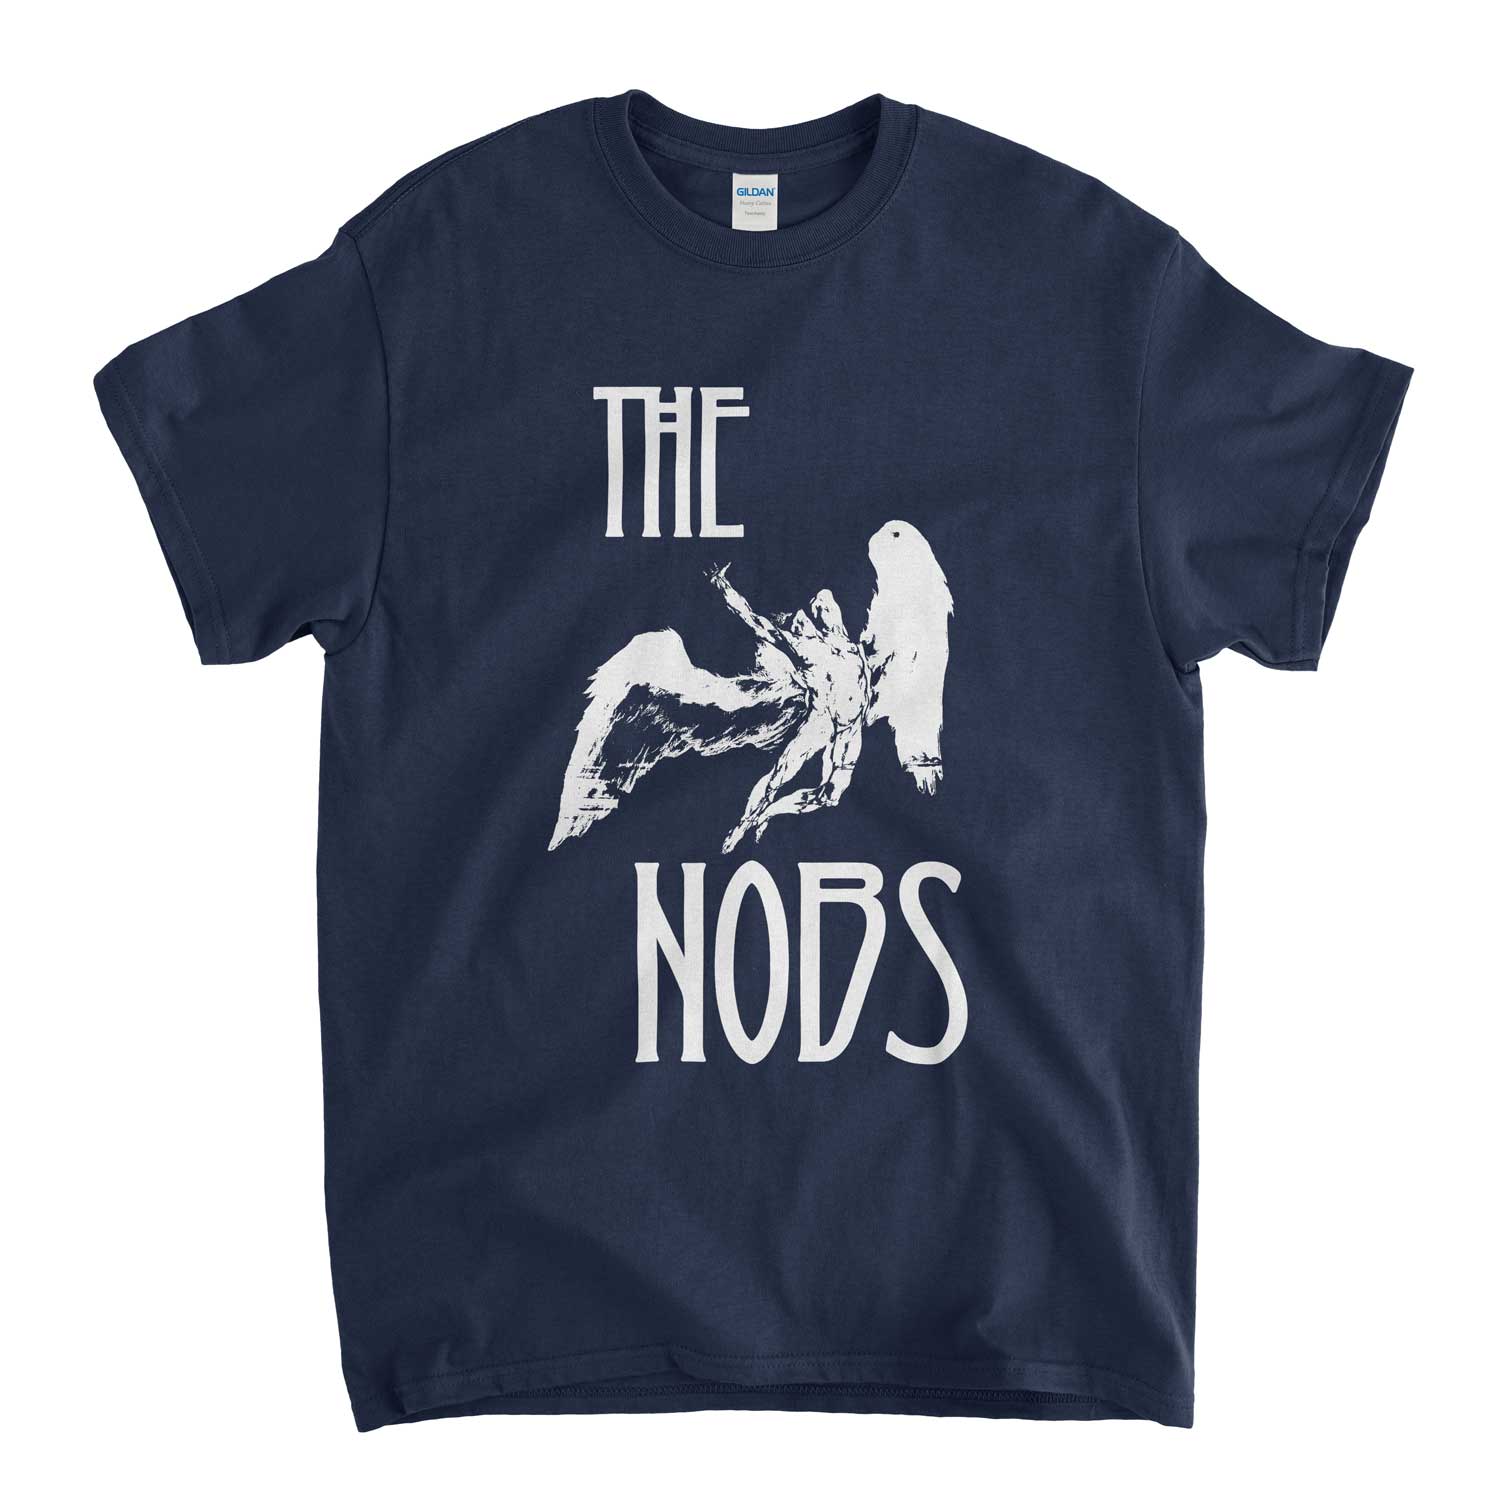 The Nobs T Shirt